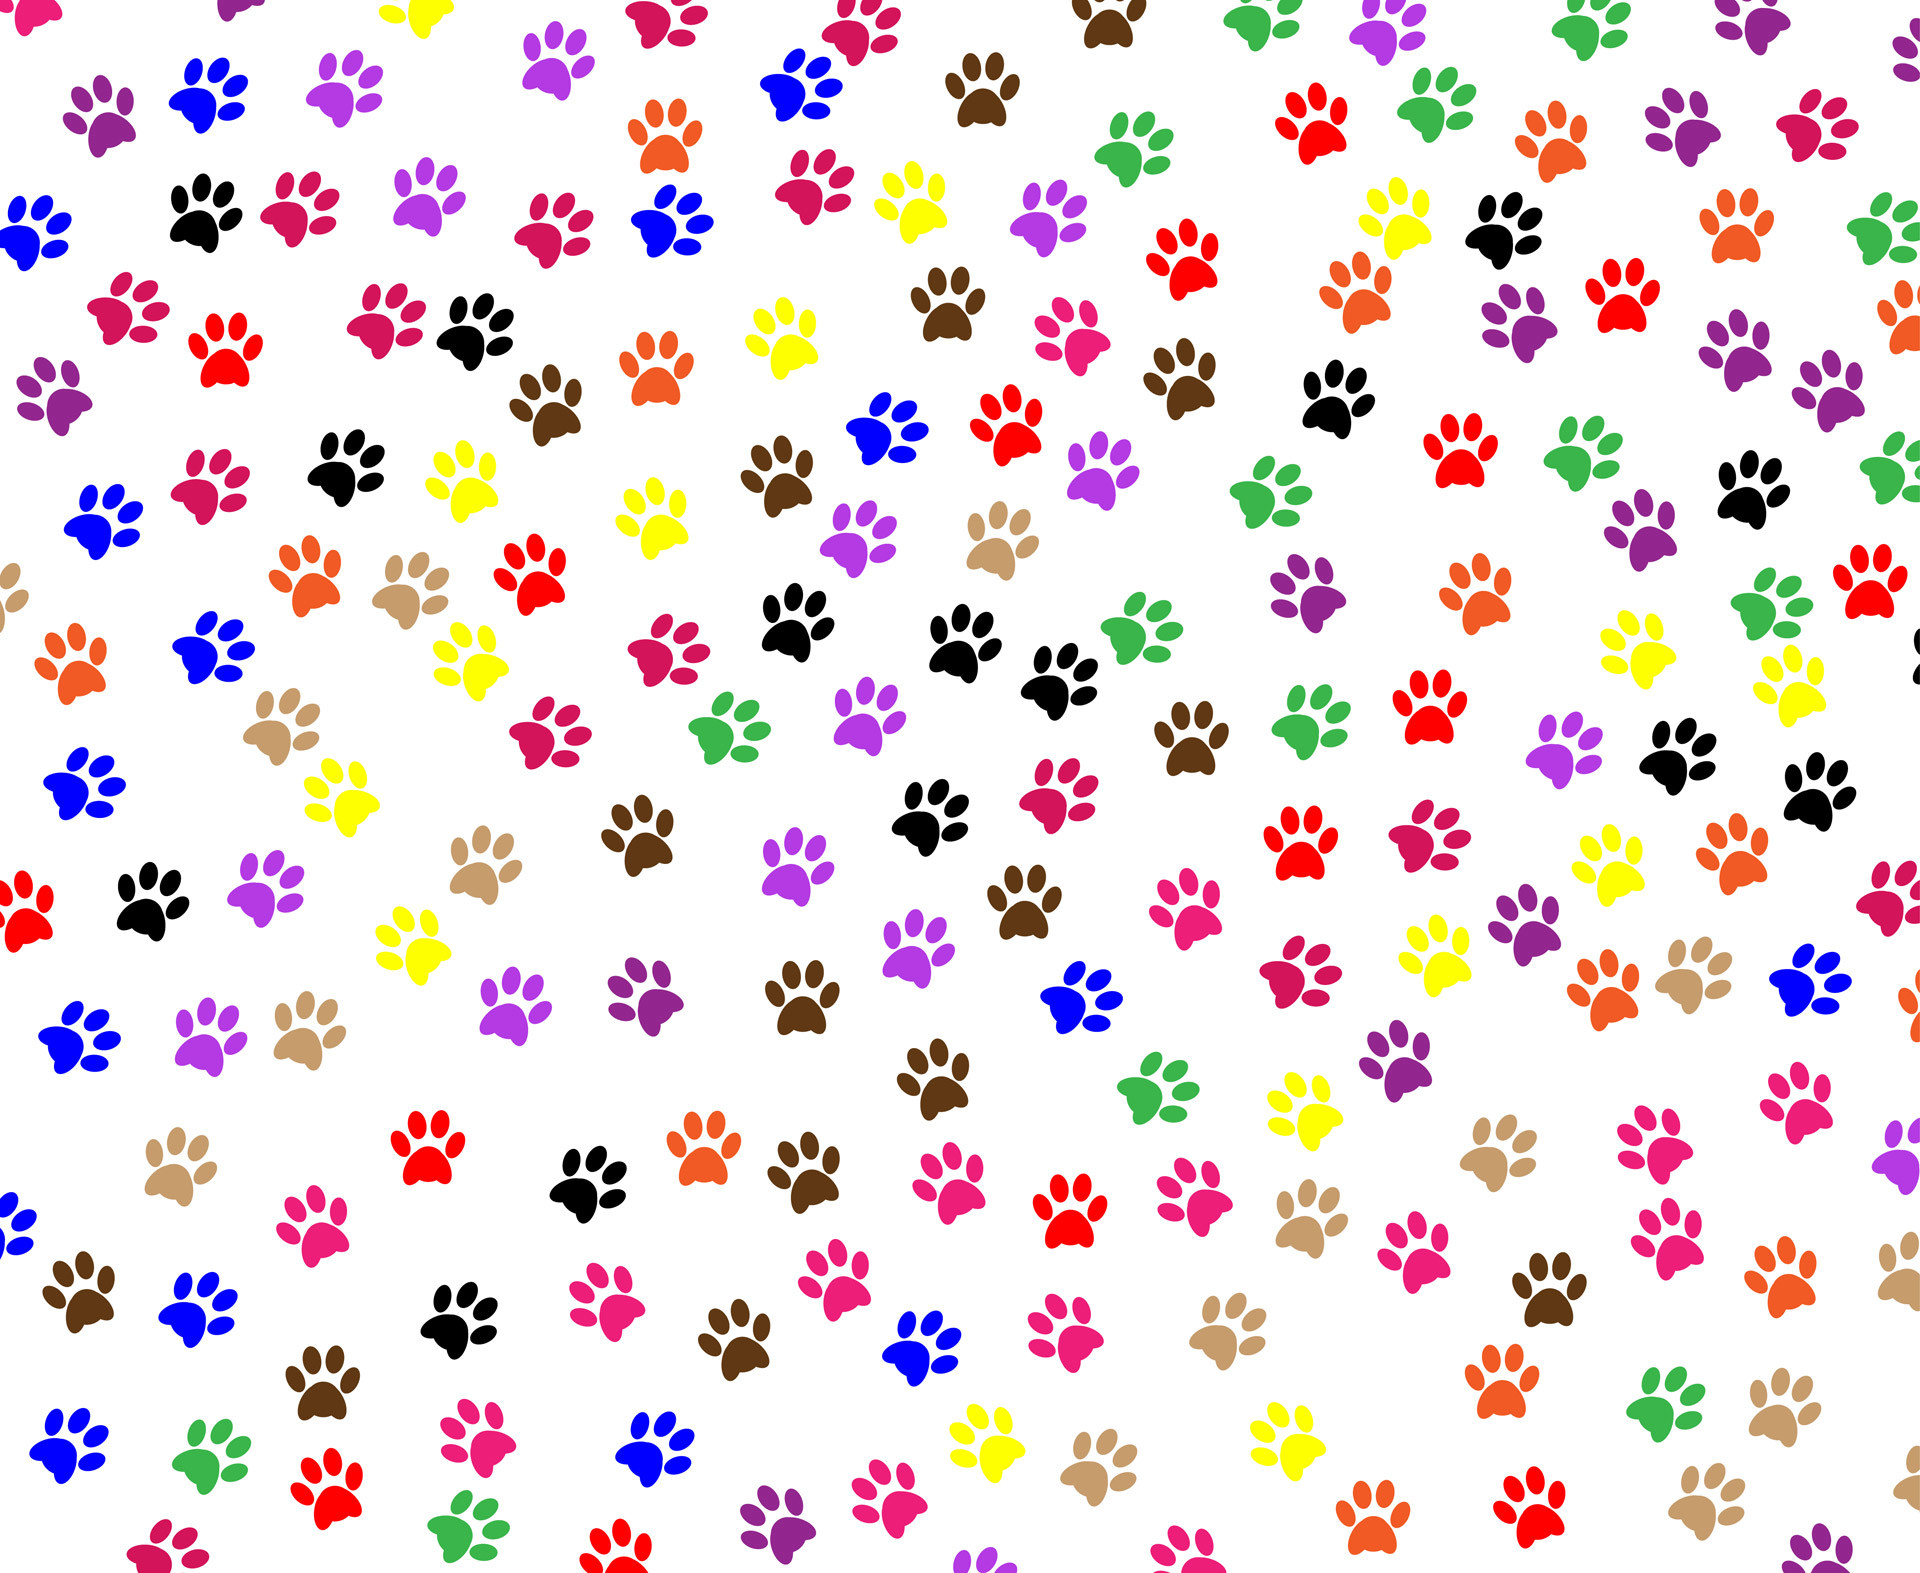 Background With Dog Paw Print And Bone Ð¡ñ‚ð¾ðºð¾ð²ð°ñ - Dog Paw Prints Backgrounds , HD Wallpaper & Backgrounds